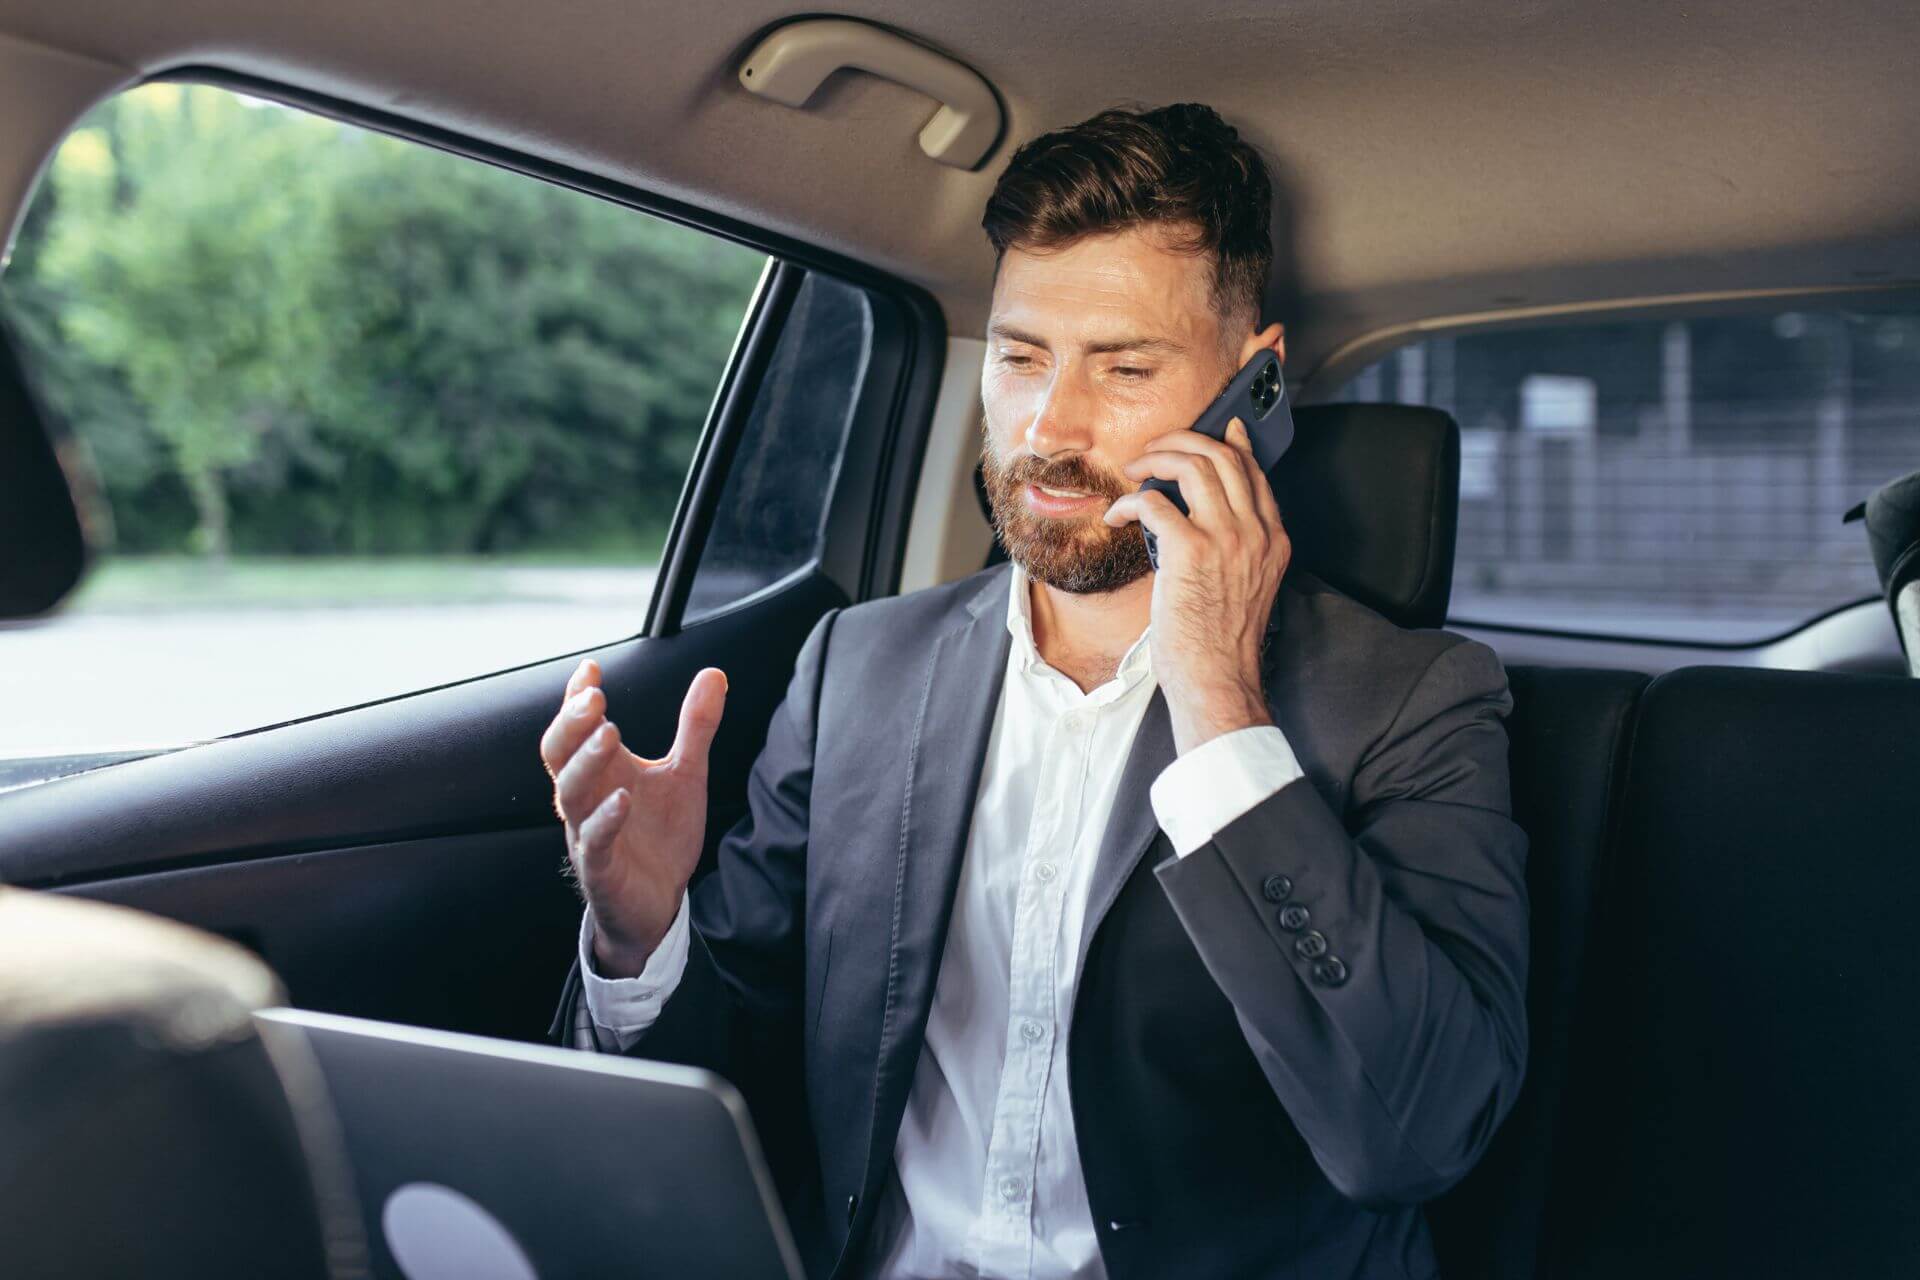 A Person in Business Attire Sitting in the Backseat of a Car, Seemingly Engaged in a Conversation With a Technical Support